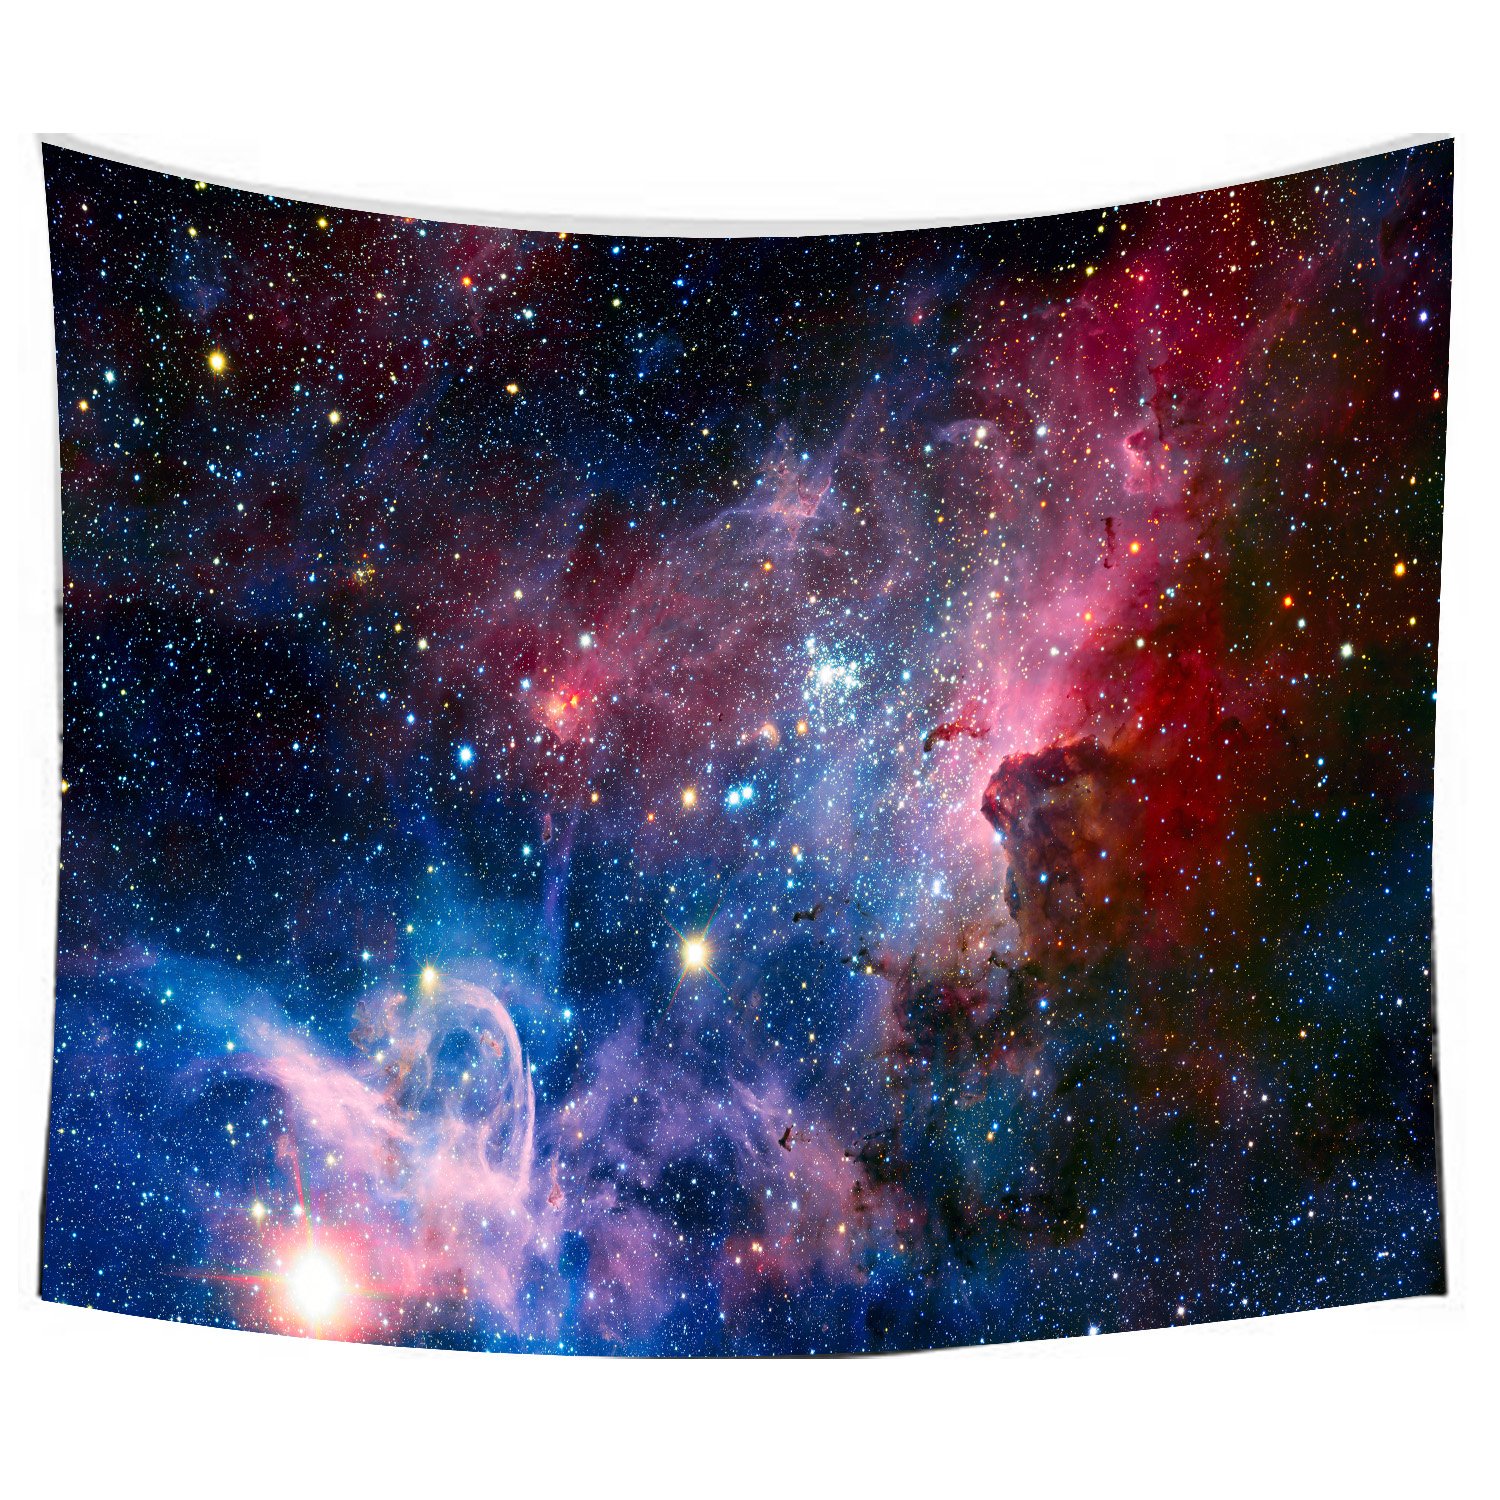 Book Cover Starry Galaxy Sky Tapestry, Home 3D Cosmic Tapestry, Living Room Bedroom Decoration Tapestry, Mattress, Tablecloth (59.1